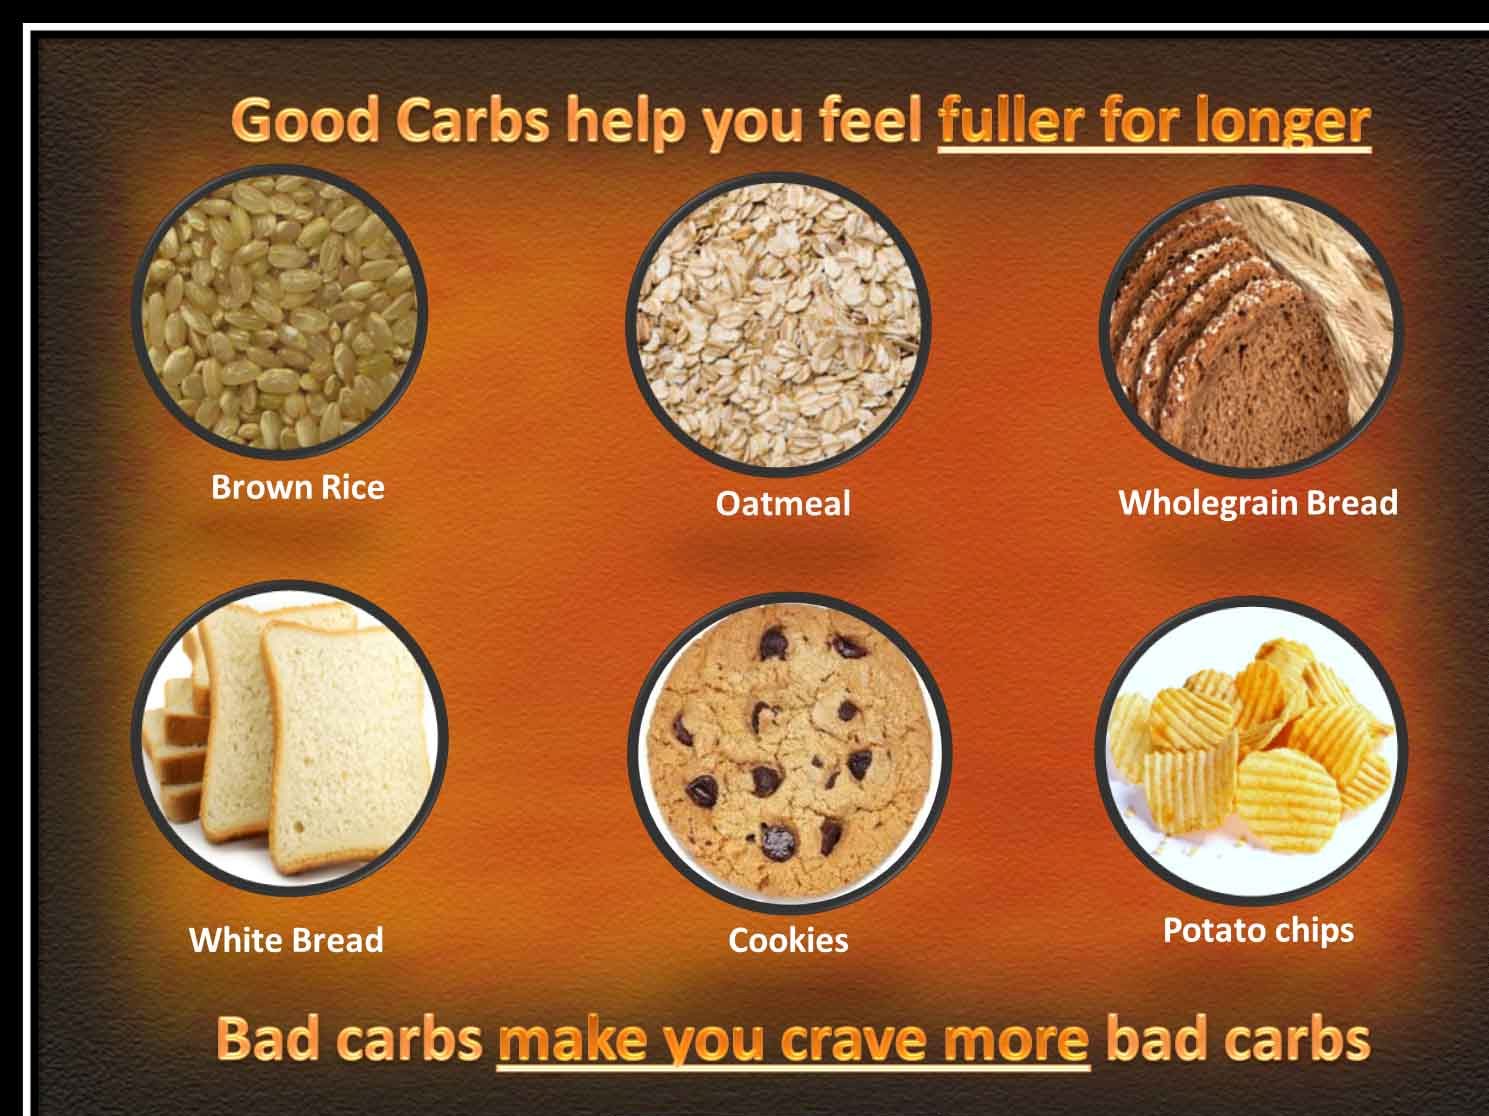 What are examples of good carbs and bad carbs?